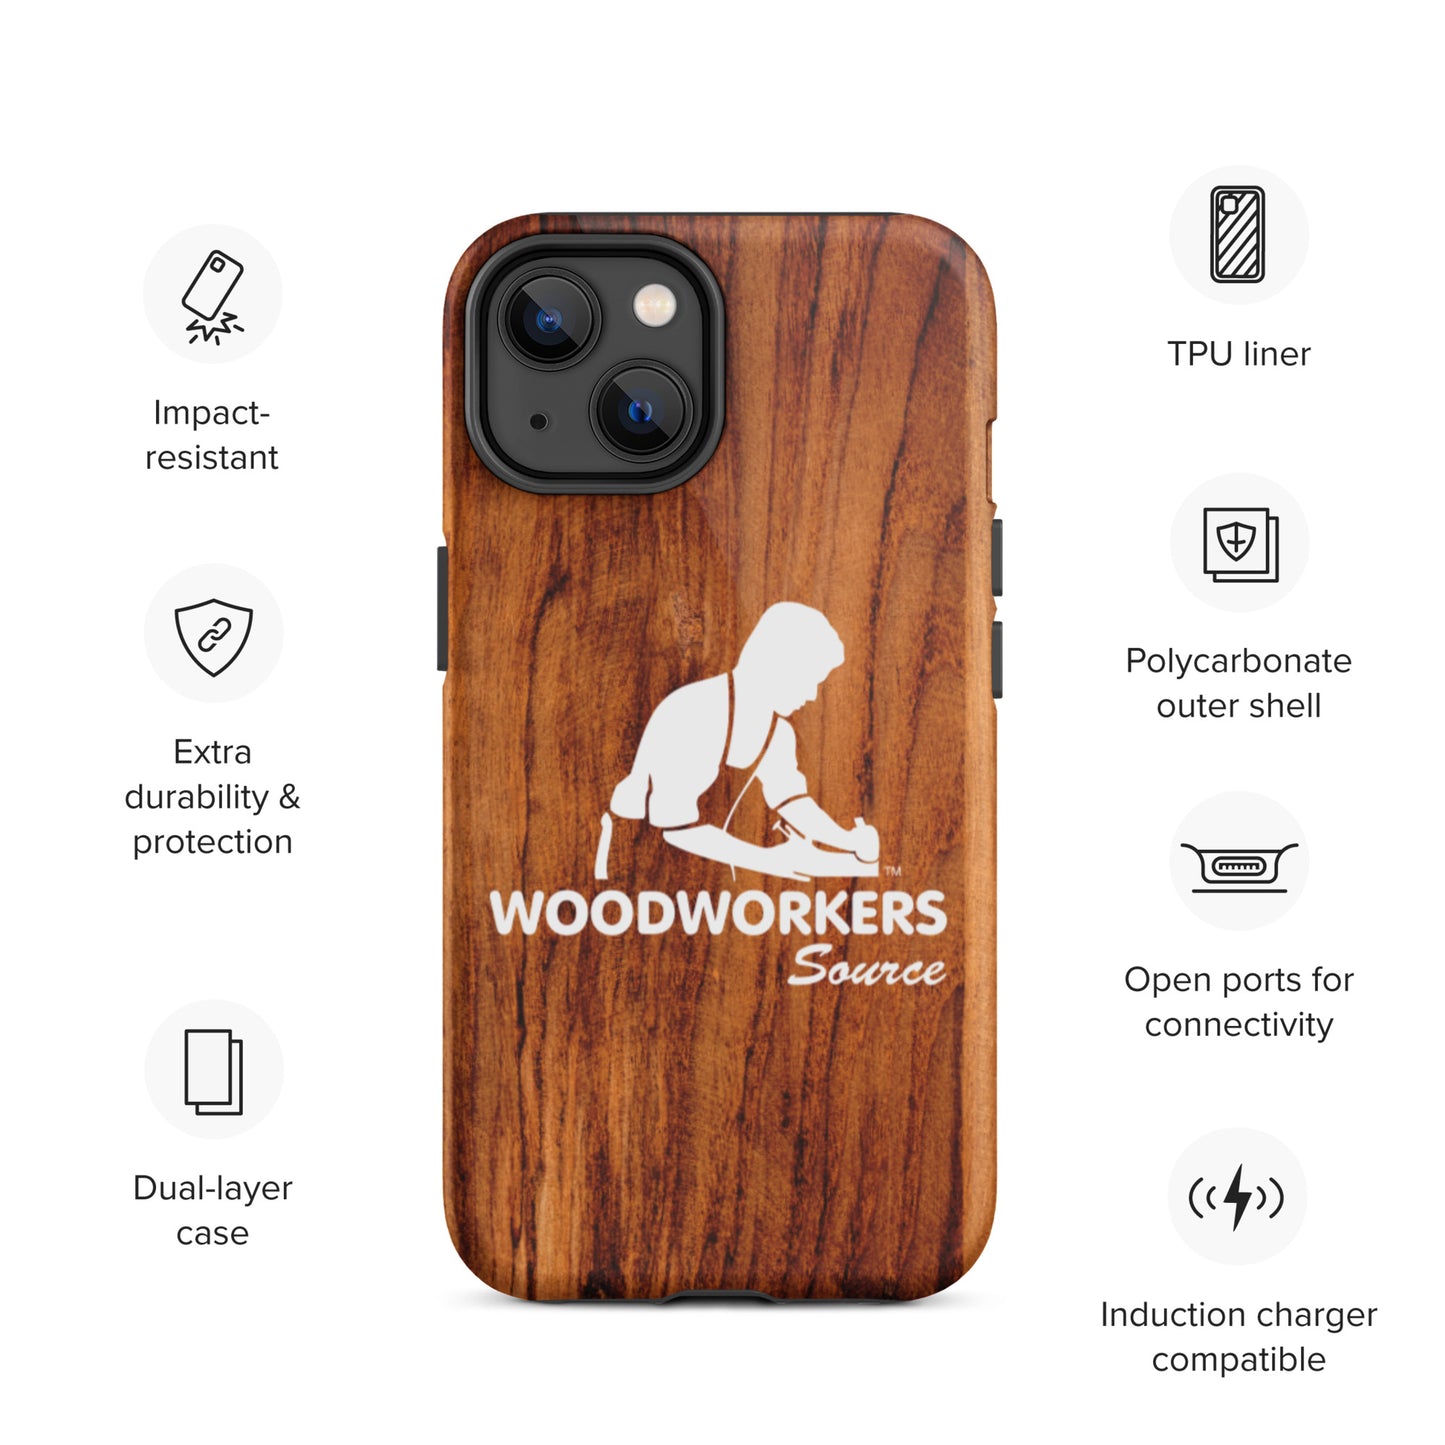 Woodworkers Source Tough iPhone case